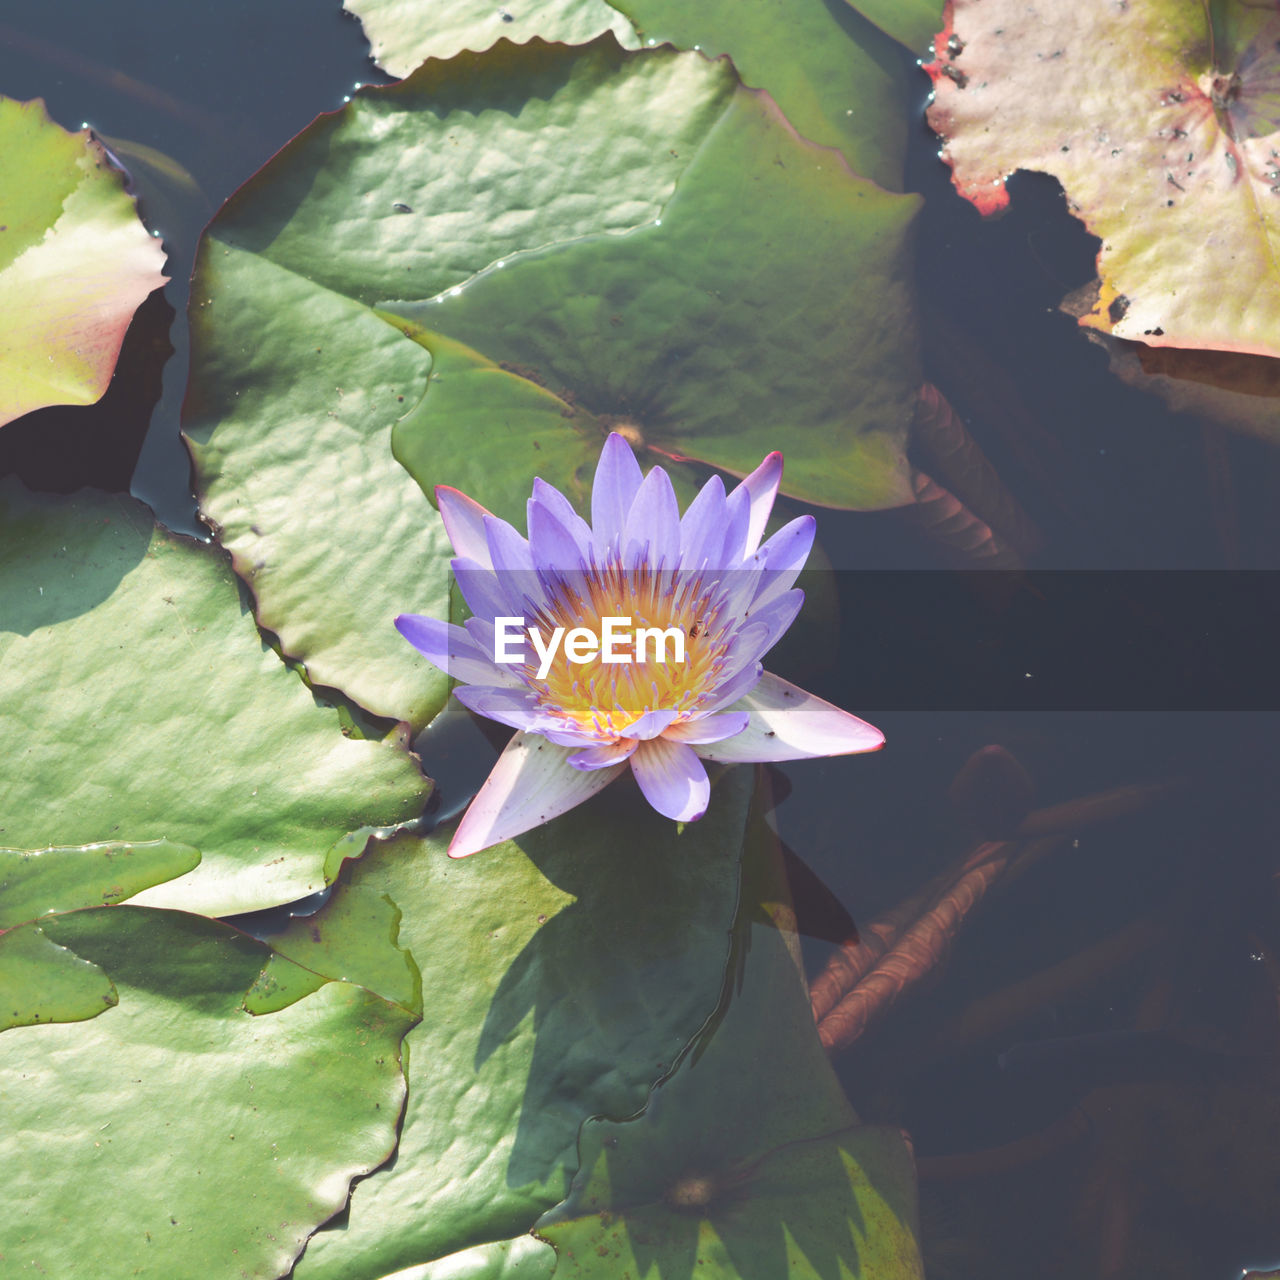 Beauty In Nature Close-up Floating Floating On Water Flower Flower Head Flowering Plant Fragility Freshness Growth Inflorescence Leaf Leaves Lotus Water Lily Nature No People Petal Plant Plant Part Pollen Pond Purple Vulnerability  Water Water Lily